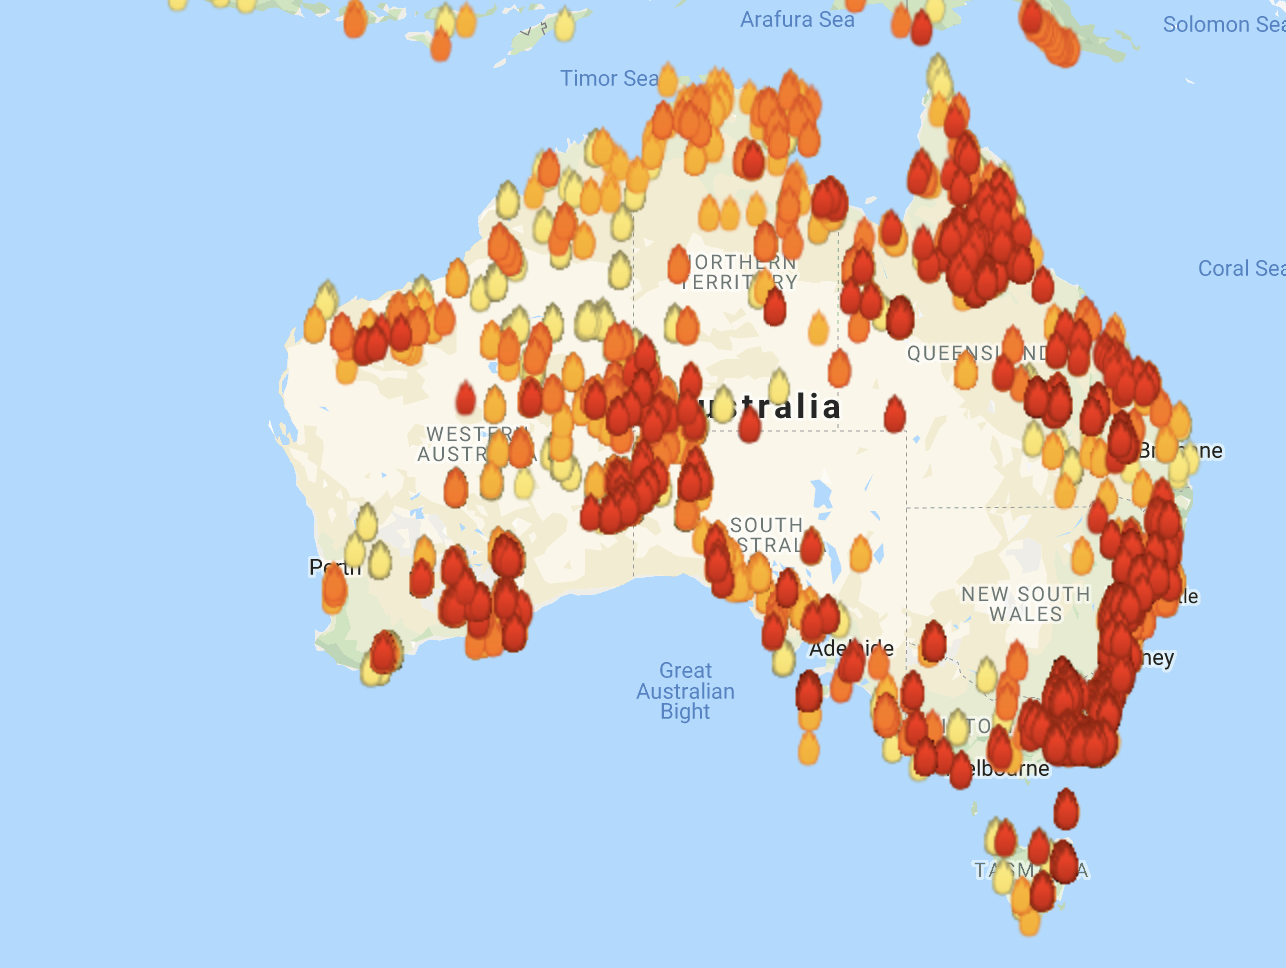 A map from researchers in Western Australia shows hundreds of wildfire hotspots across the nation as of Wednesday, Jan. 1, 2020. (Landgate's MyFireWatch)